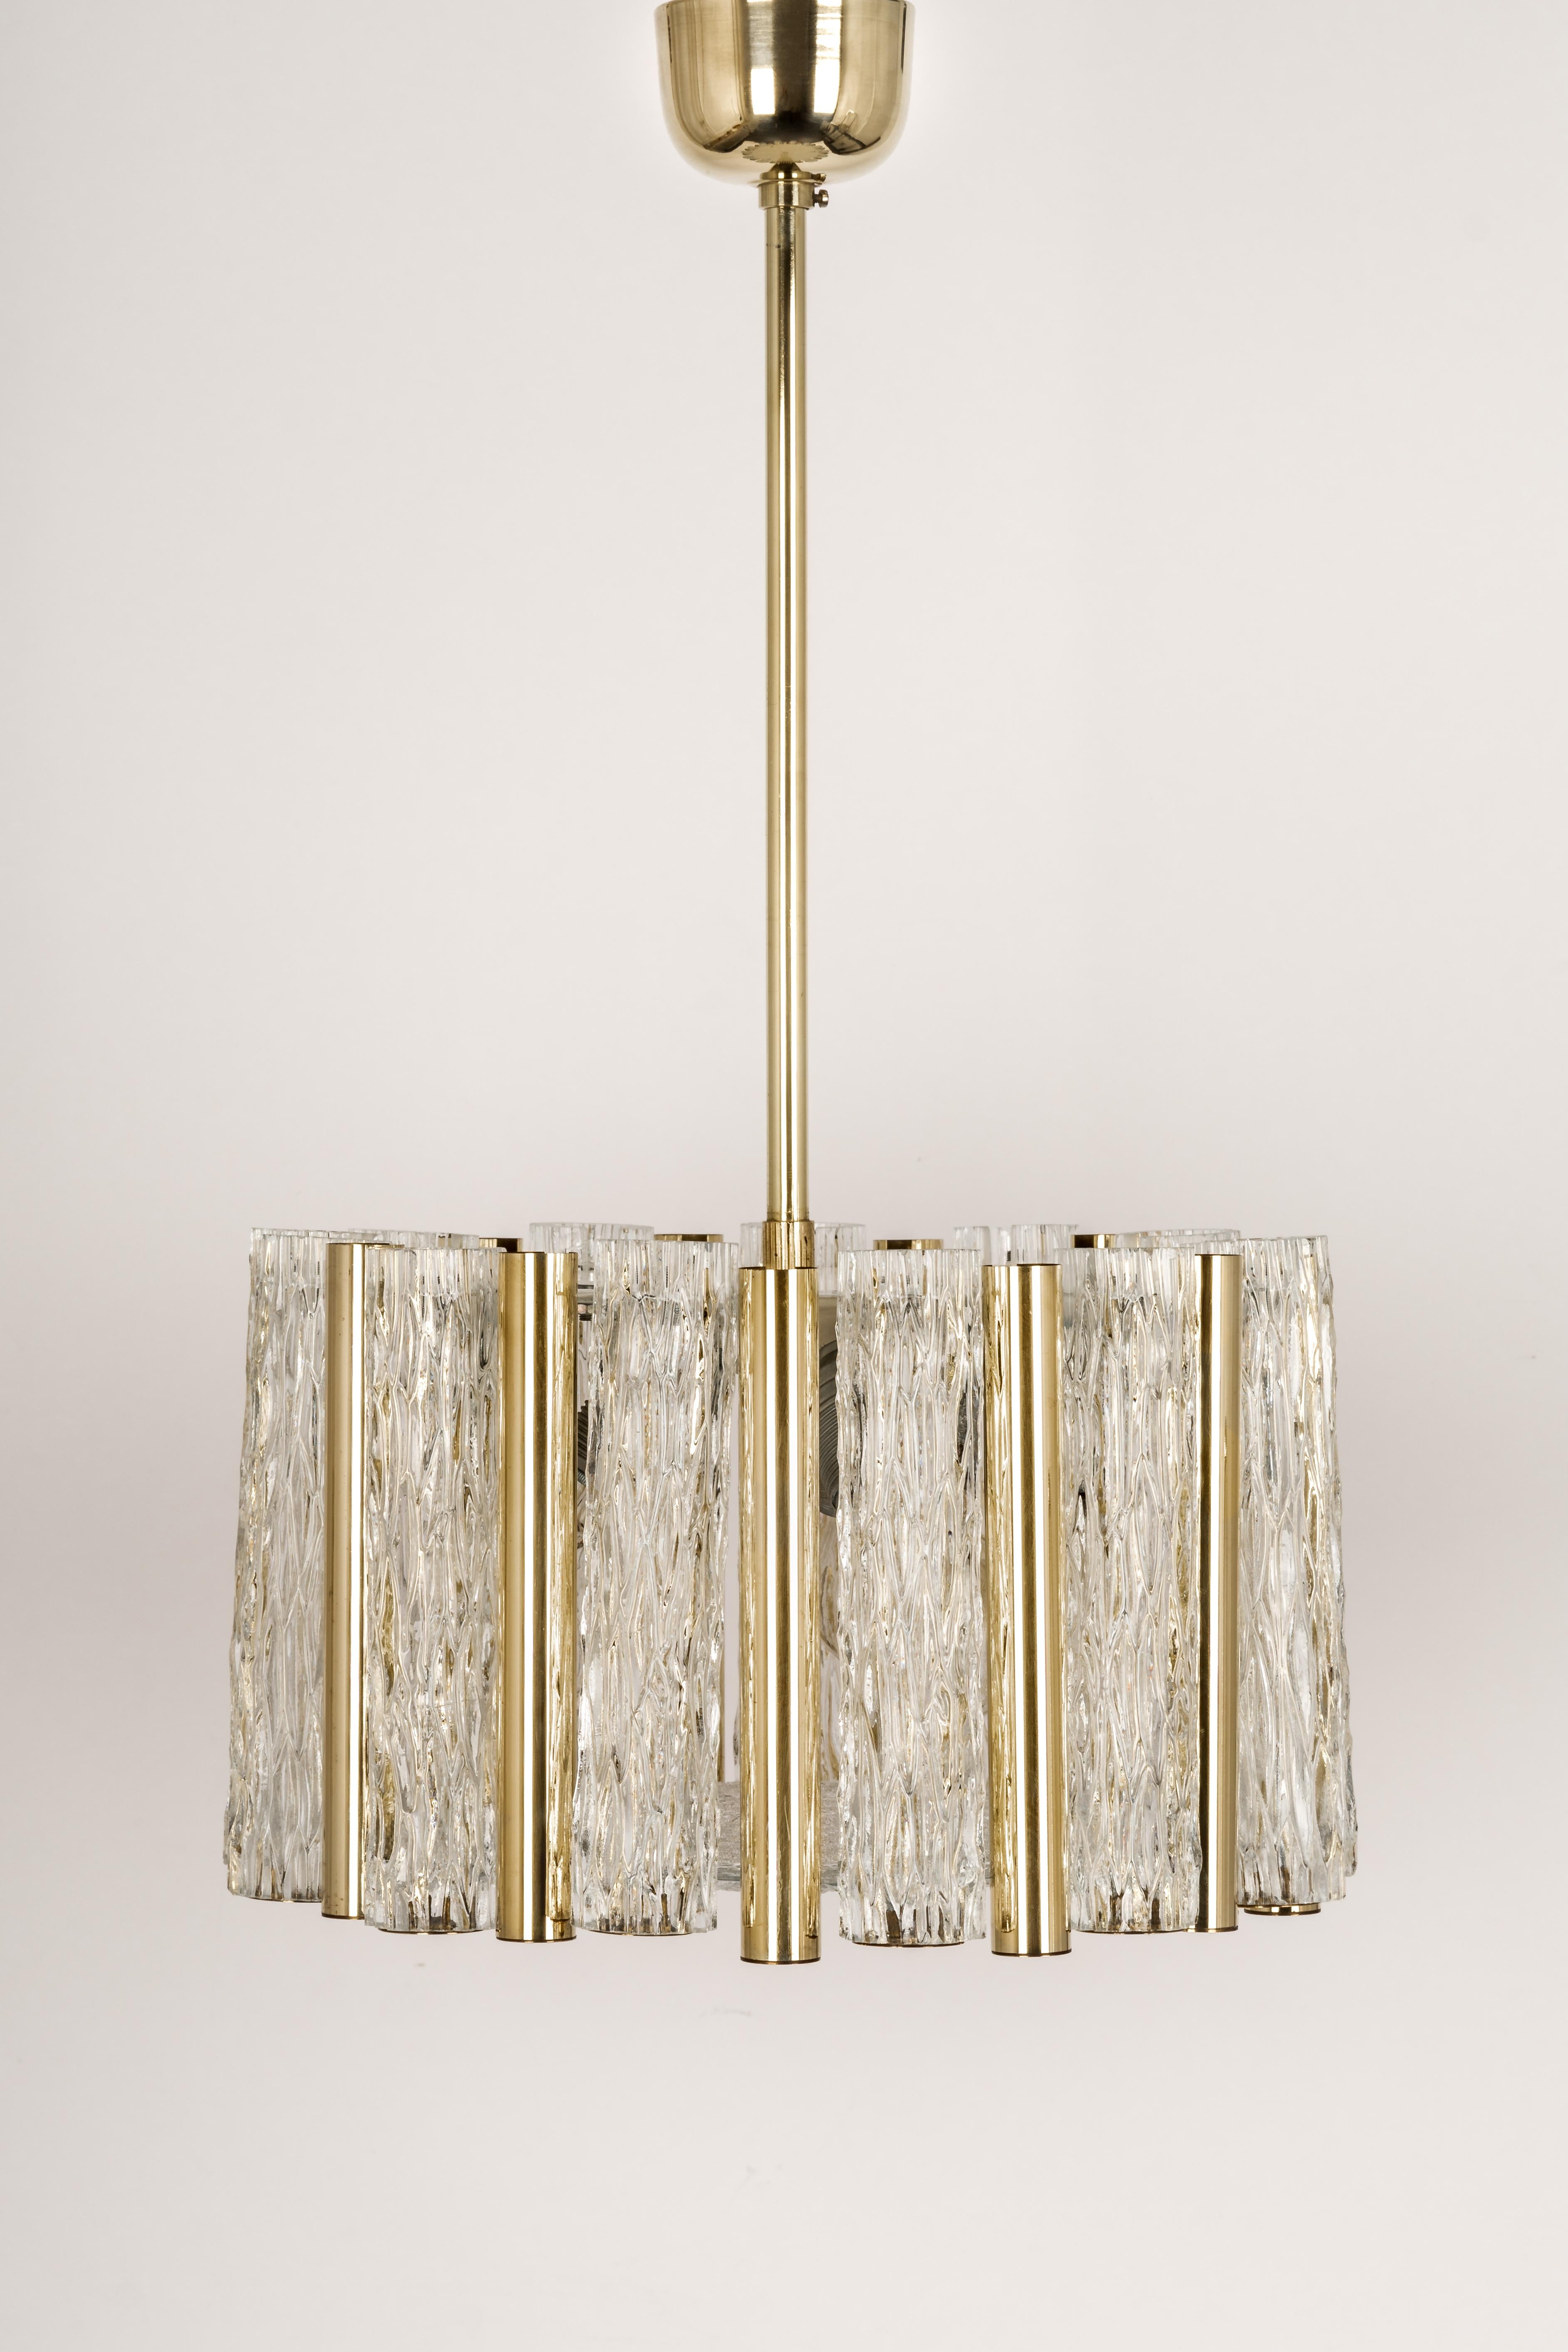 Brass drum form pendant ceiling fixture with tubular textured glass shades by Kaiser Leuchten, Germany, circa the 1960s.

High quality and in very good condition. Cleaned, well-wired and ready to use. 

The fixture requires 3 x E27 standard